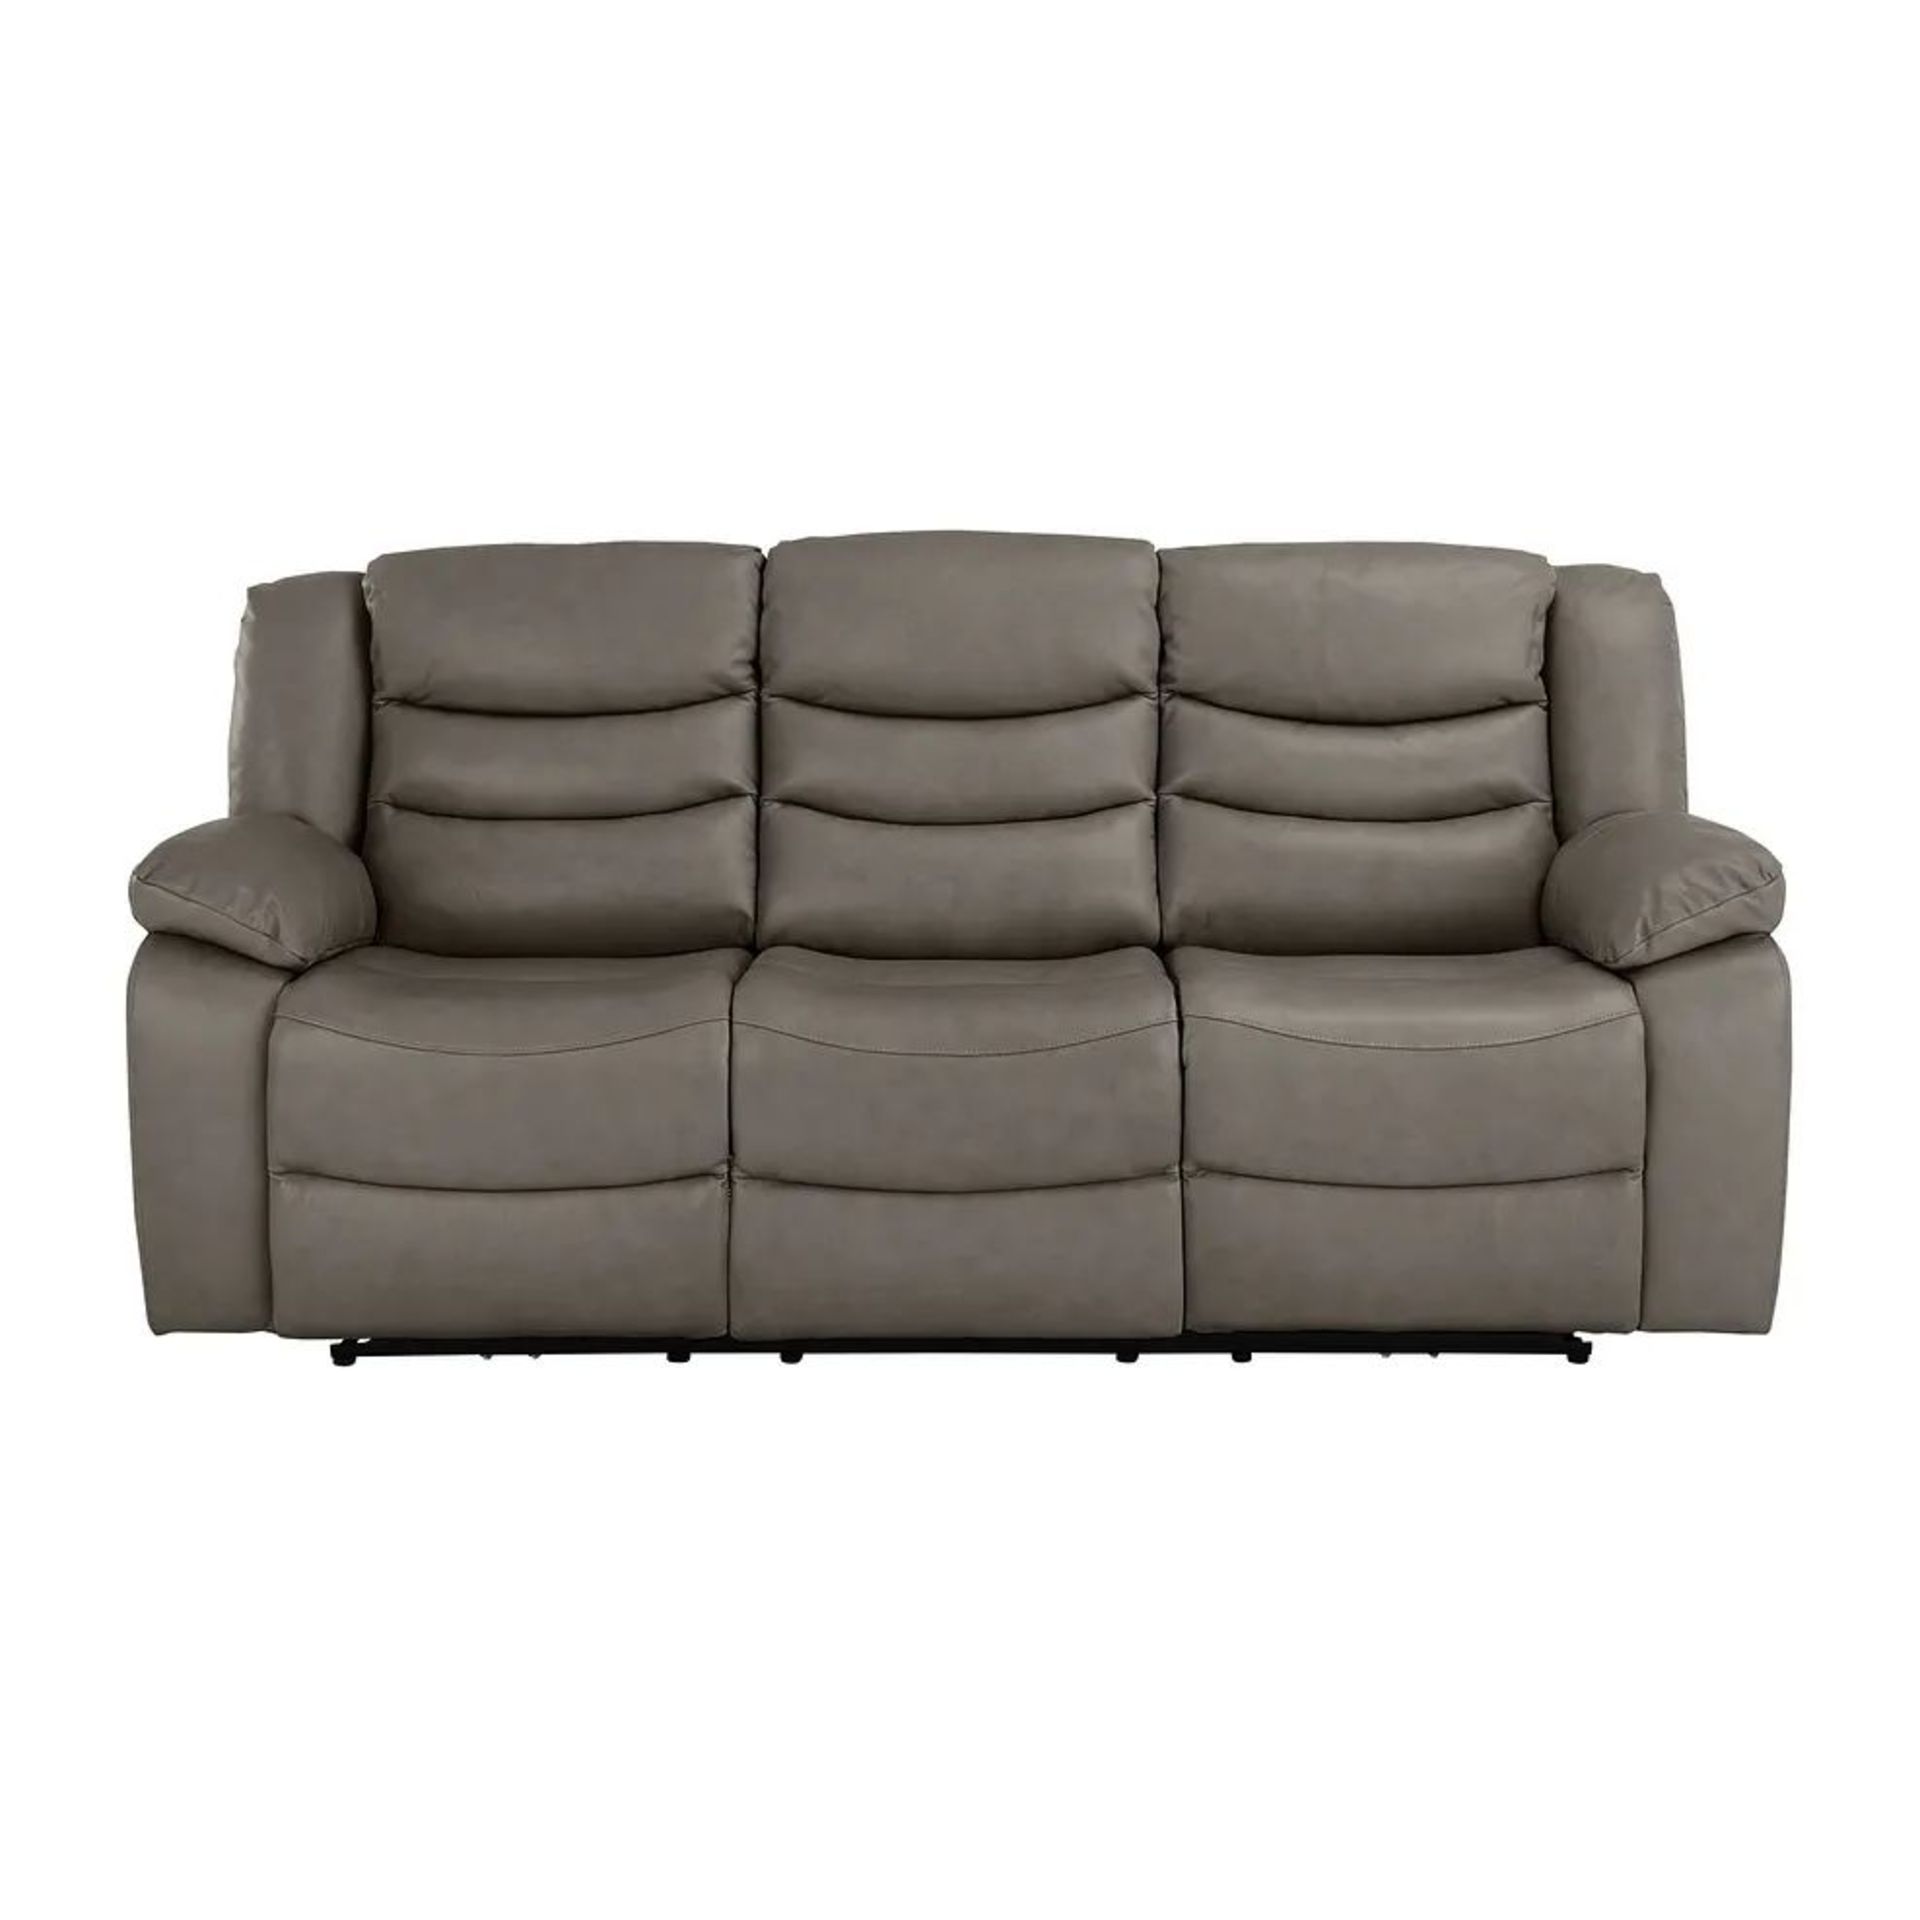 BRAND NEW MARLOW 3 Seater Electric Recliner Sofa - DARK GREY LEATHER. RRP £1849. Our Marlow - Image 2 of 11